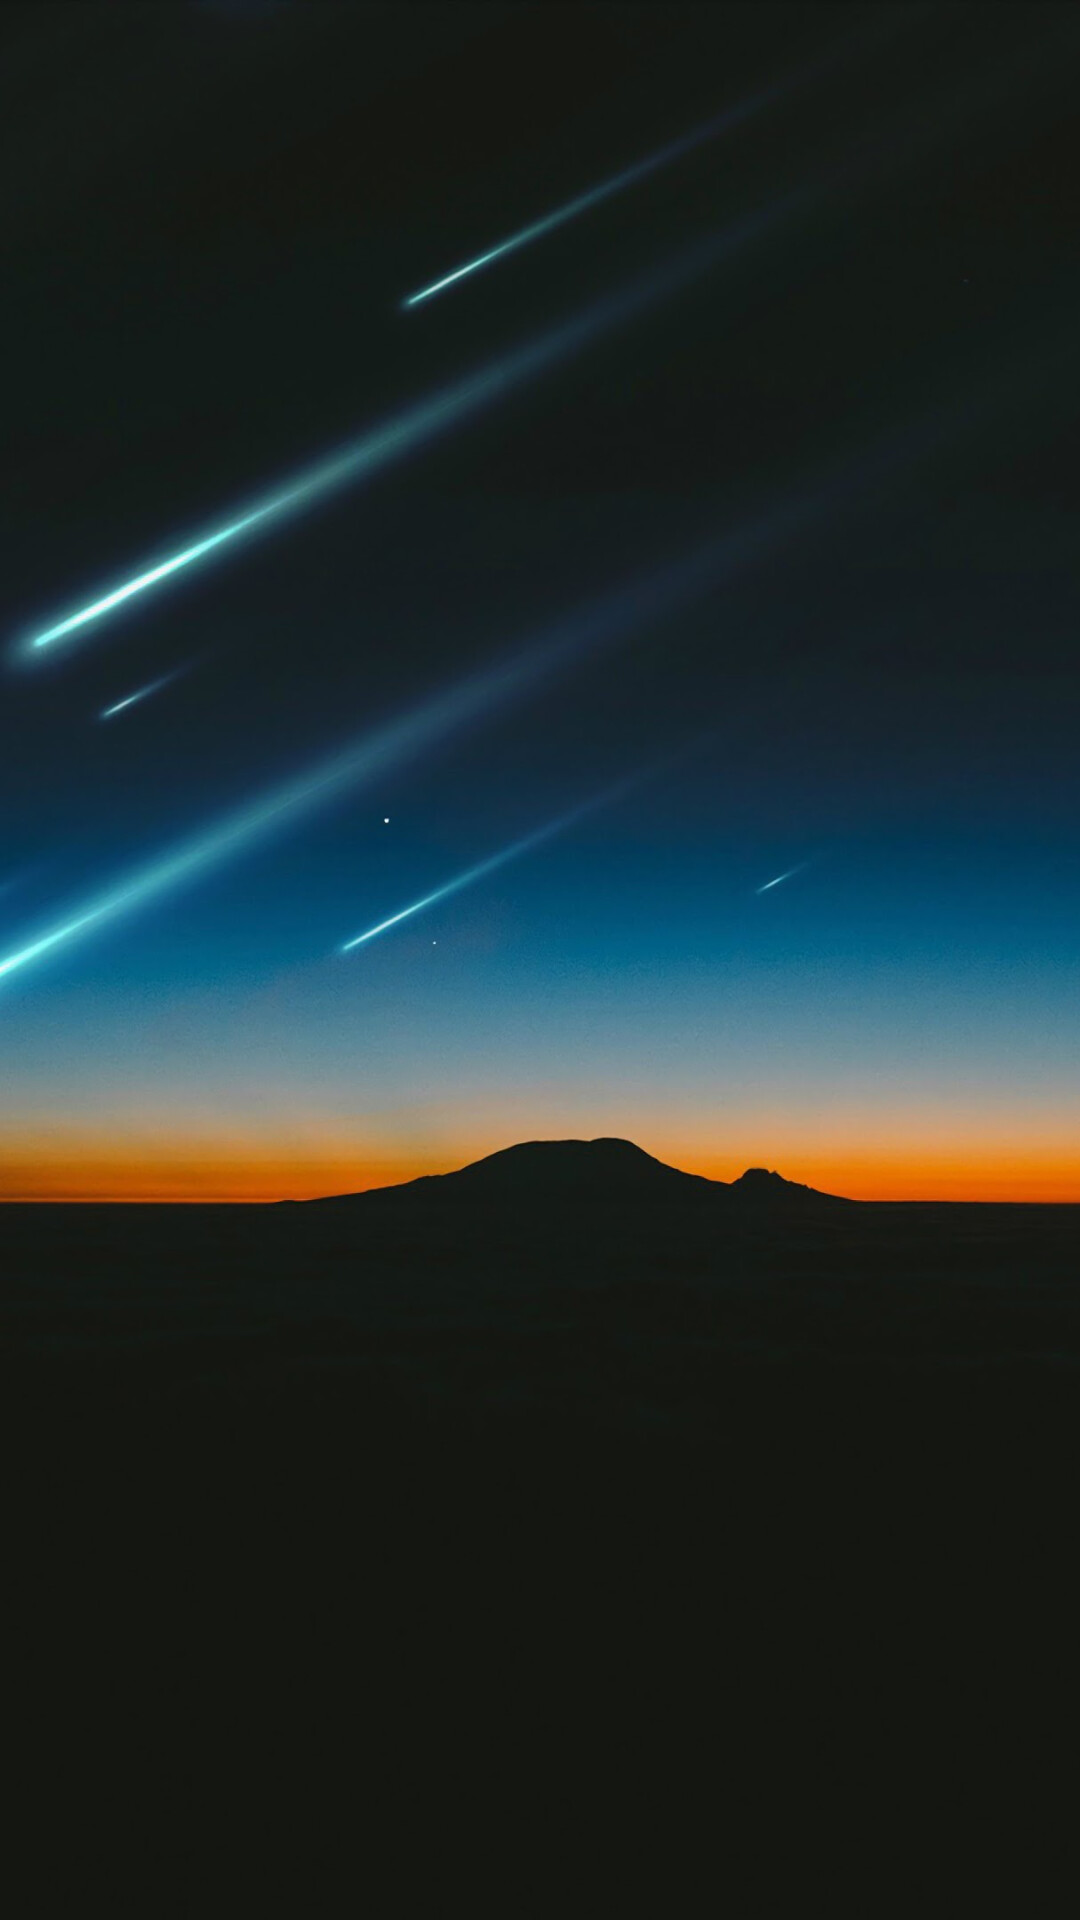 Meteor: Night sky, Dusk, Comet, Astronomical object. 1080x1920 Full HD Background.